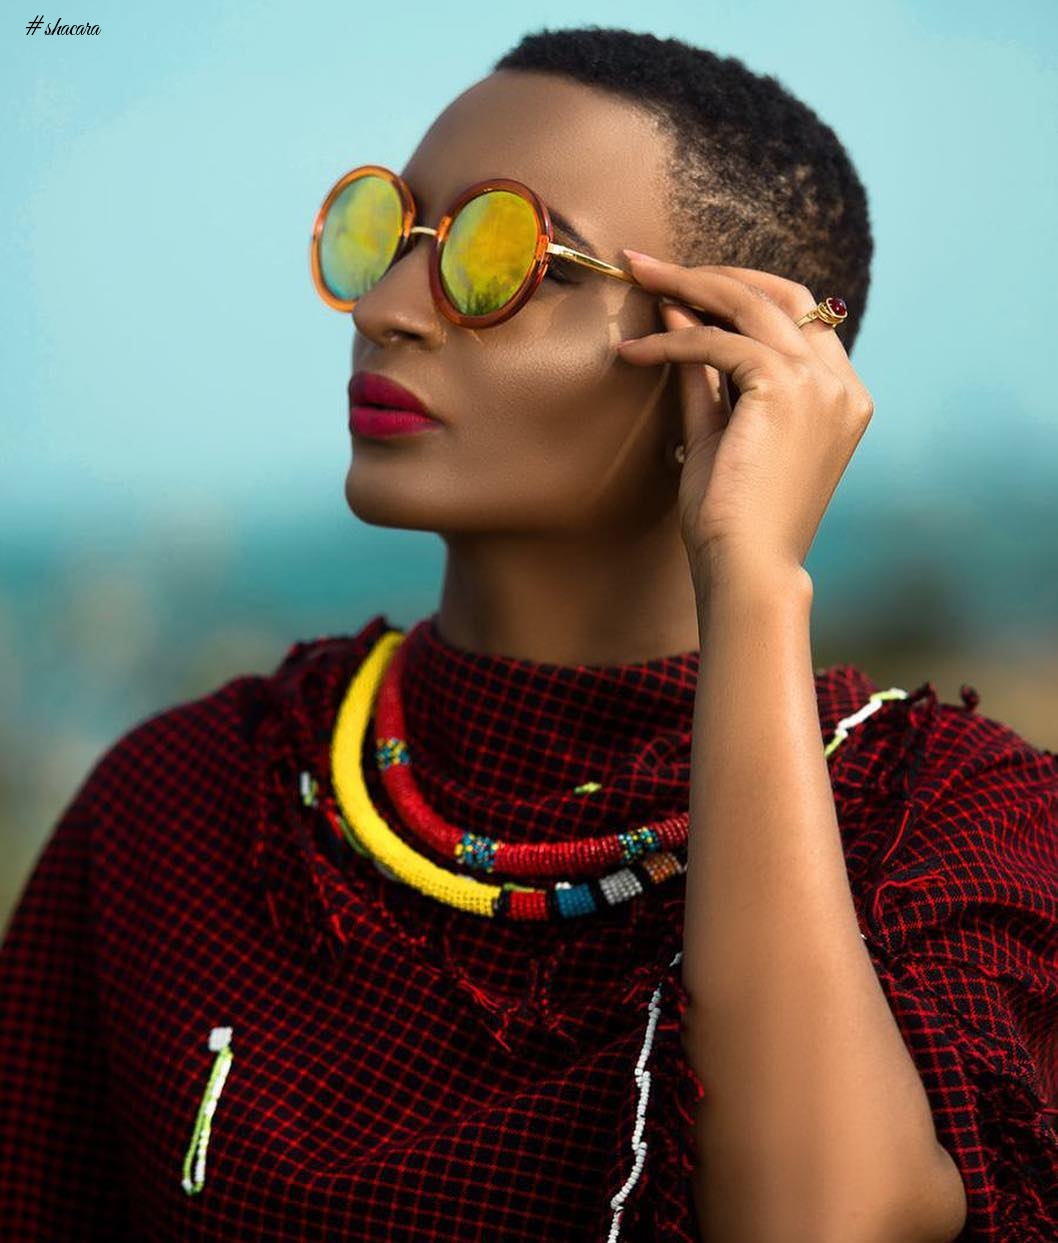 THE FACES BEHIND THE CAMERA: THE AFRICAN FASHION PHOTOGRAPHERS TO LOOK OUT FOR IN 2017.